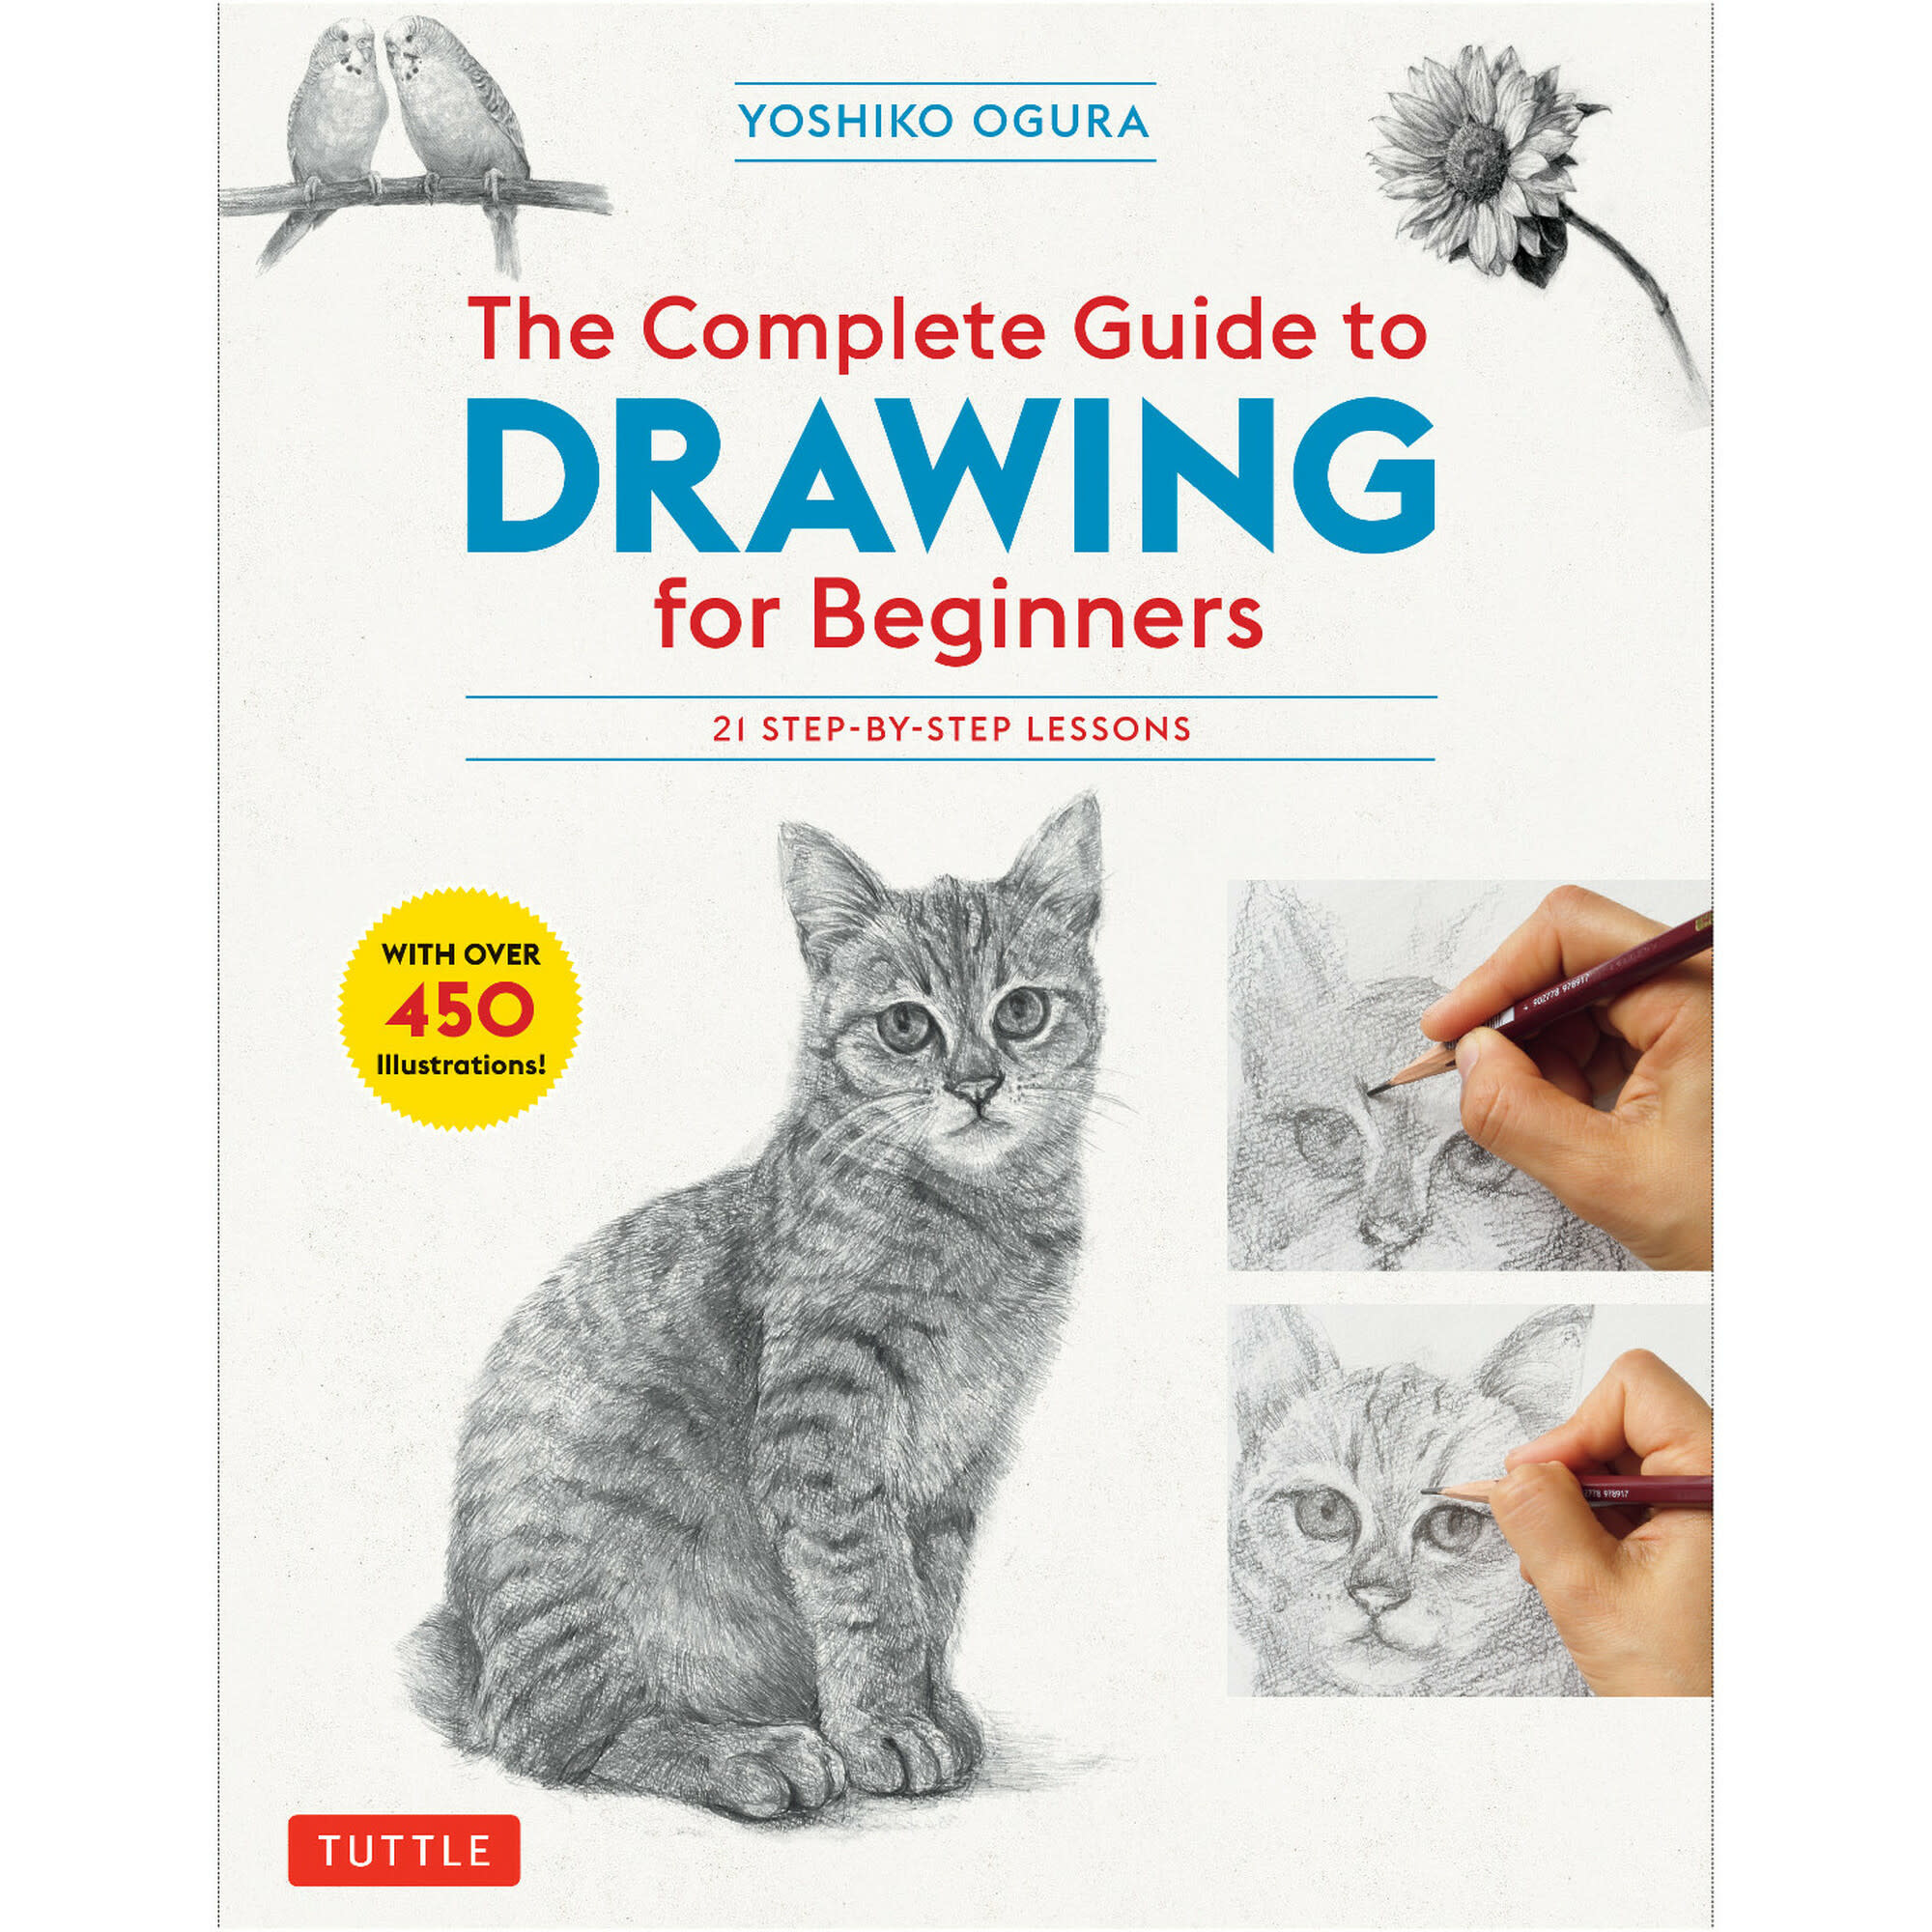 The Complete Guide to Drawing for Beginners